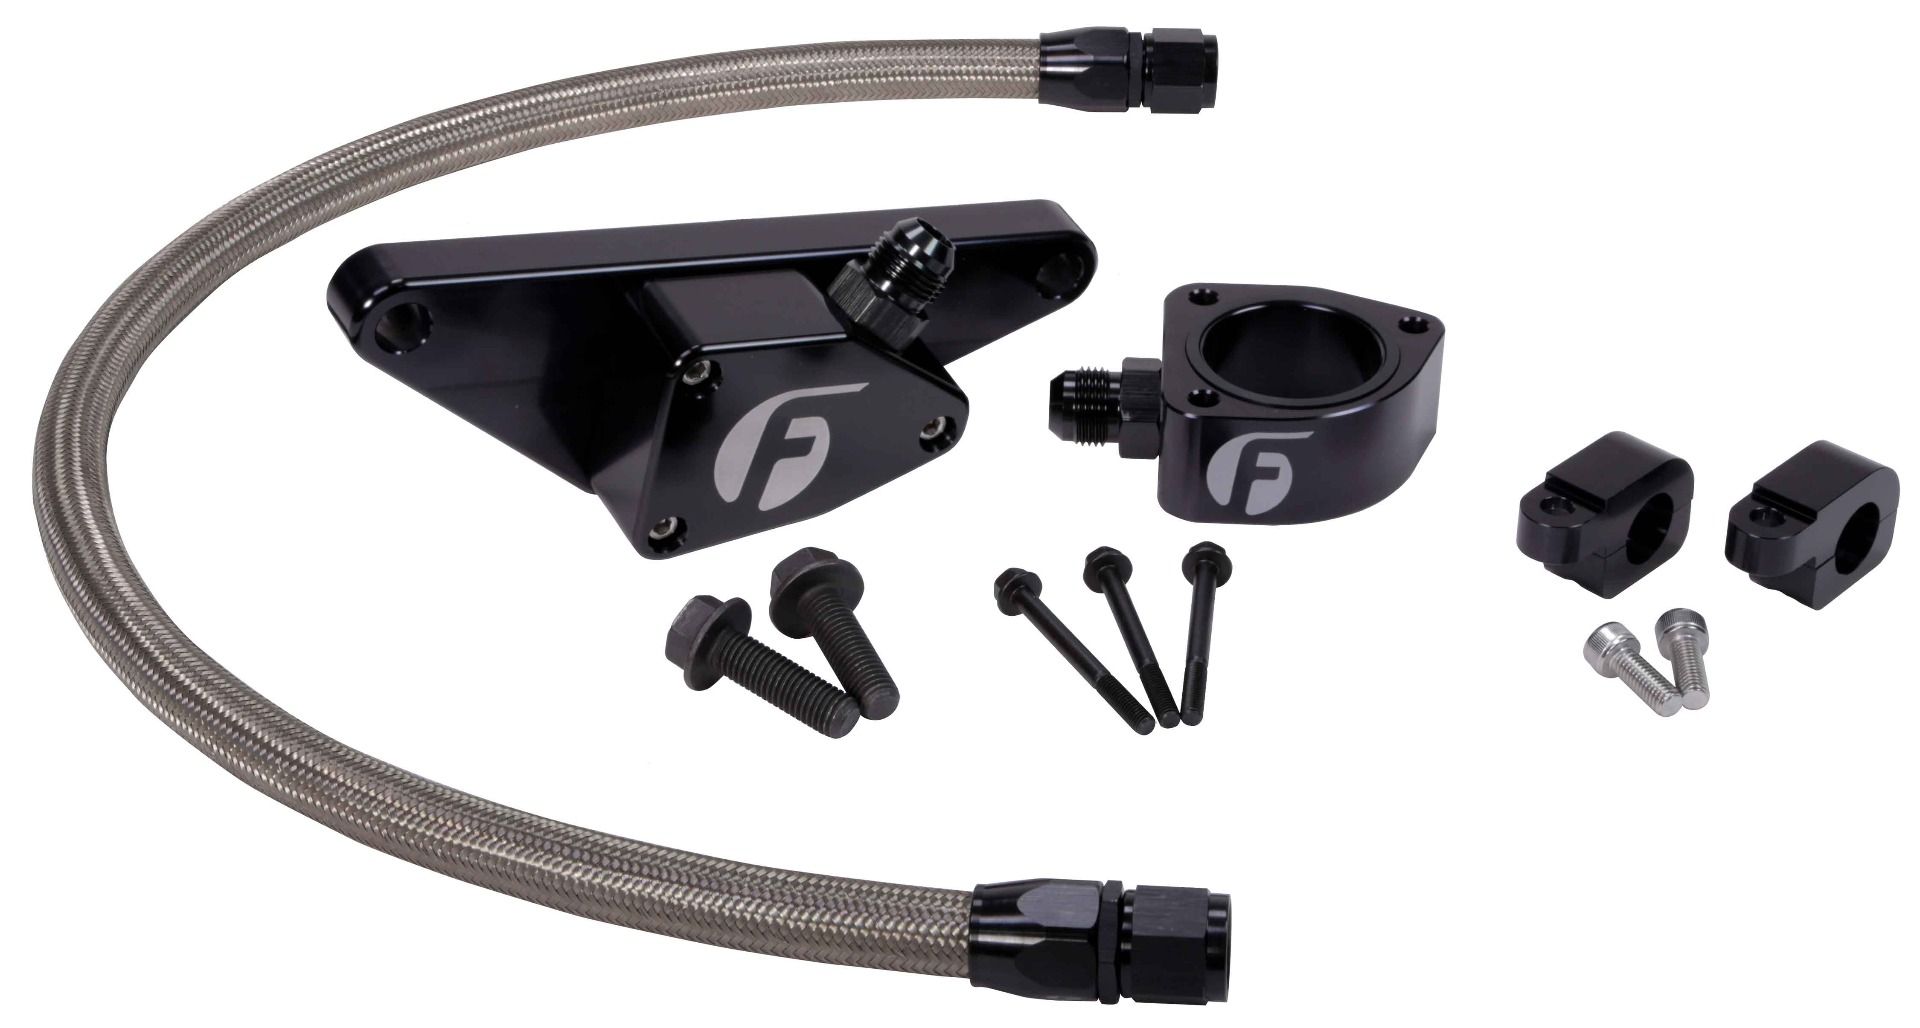 FPE-CLNTBYPS-CUMMINS-MAN-SS Fleece Coolant Bypass Kit for 2003-2018 Cummins Manual Transmission & 2007.5 to present Non EGR Equipped w/ Stainless Steel Braided Line Hell On Wheels Canada